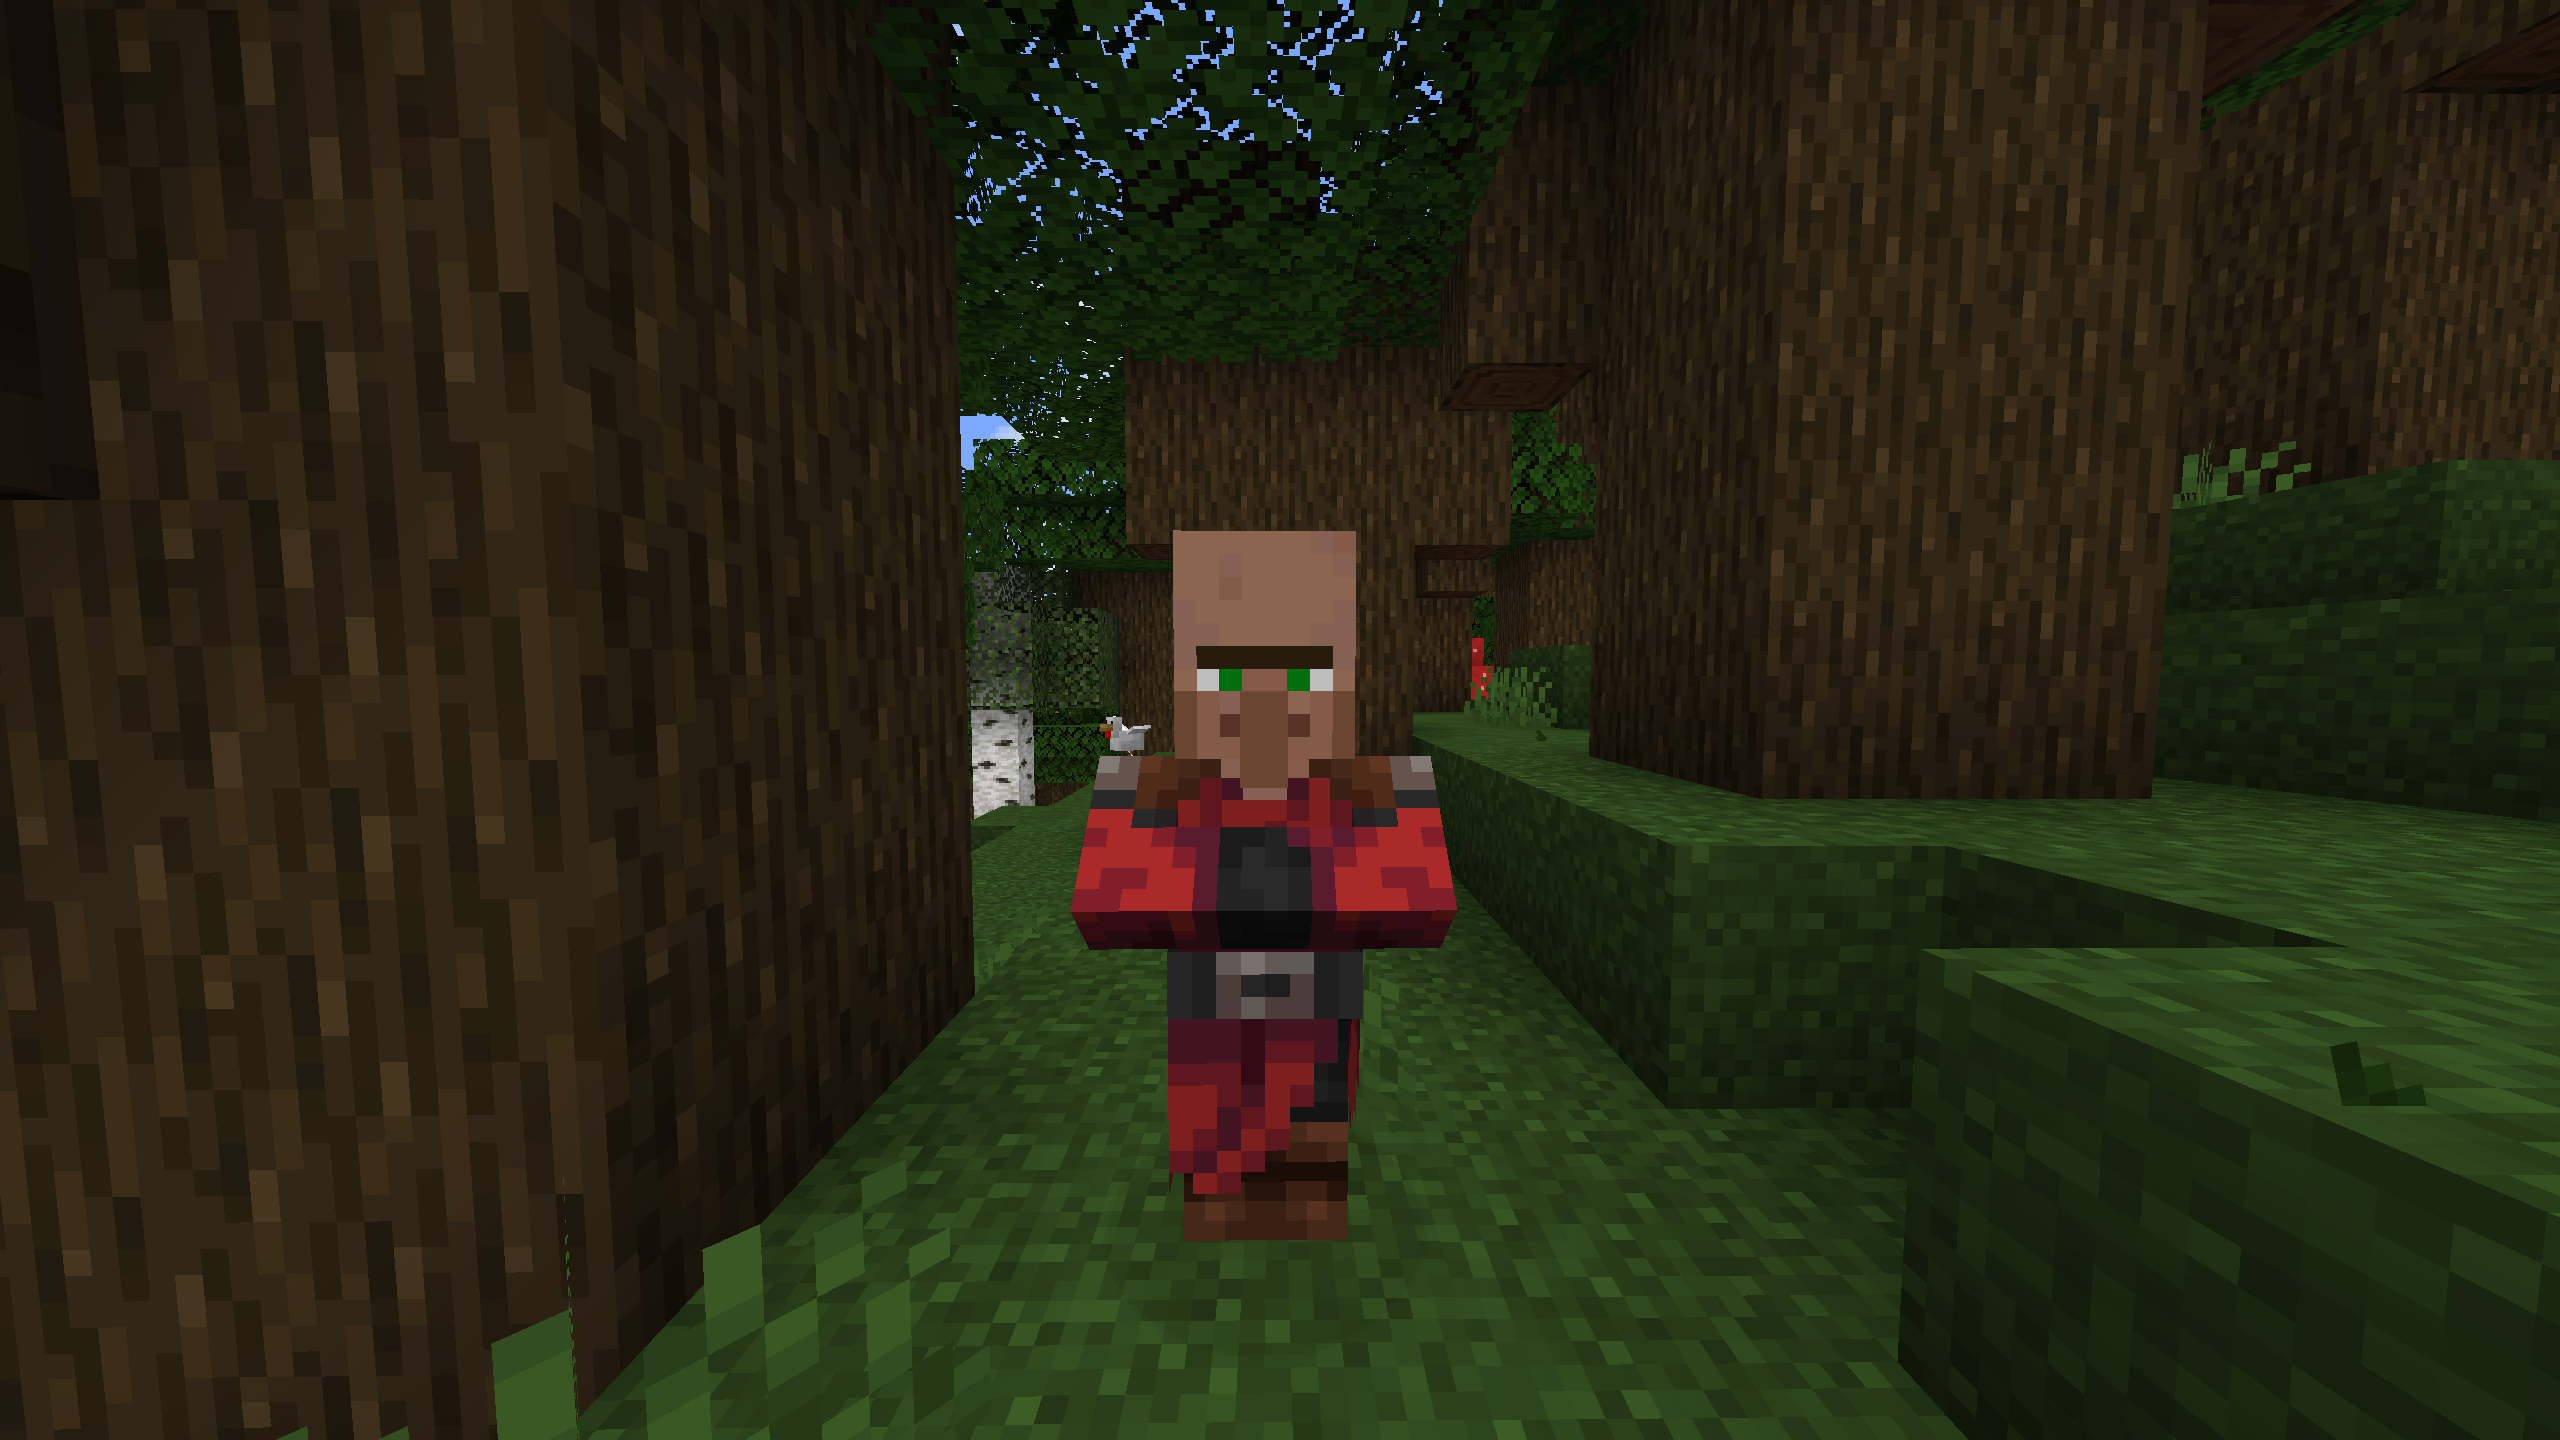 The villager variant that spawns in the Dark Oak Forest biome